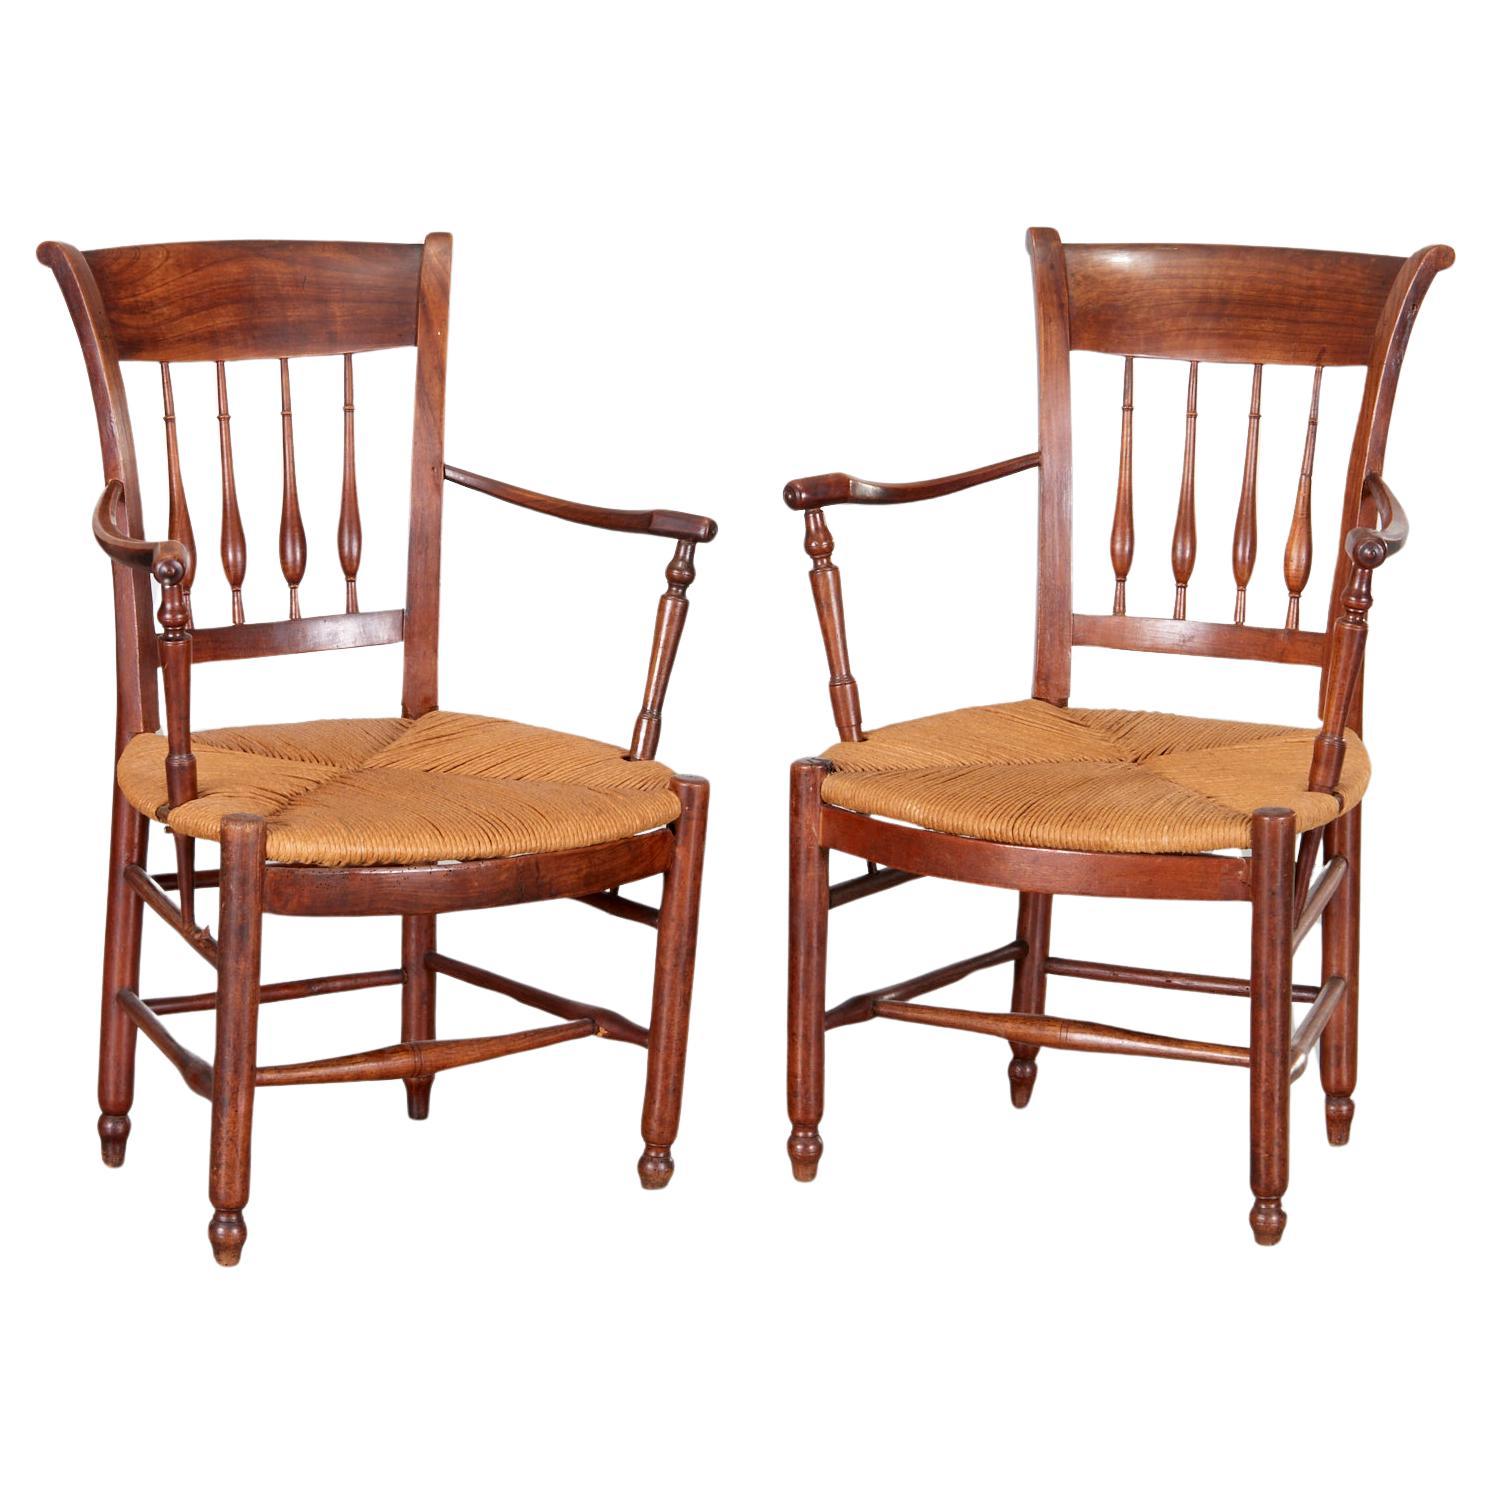 Antique Pair of French Provincial Turned Wood Arm Chairs with Rush Seats For Sale